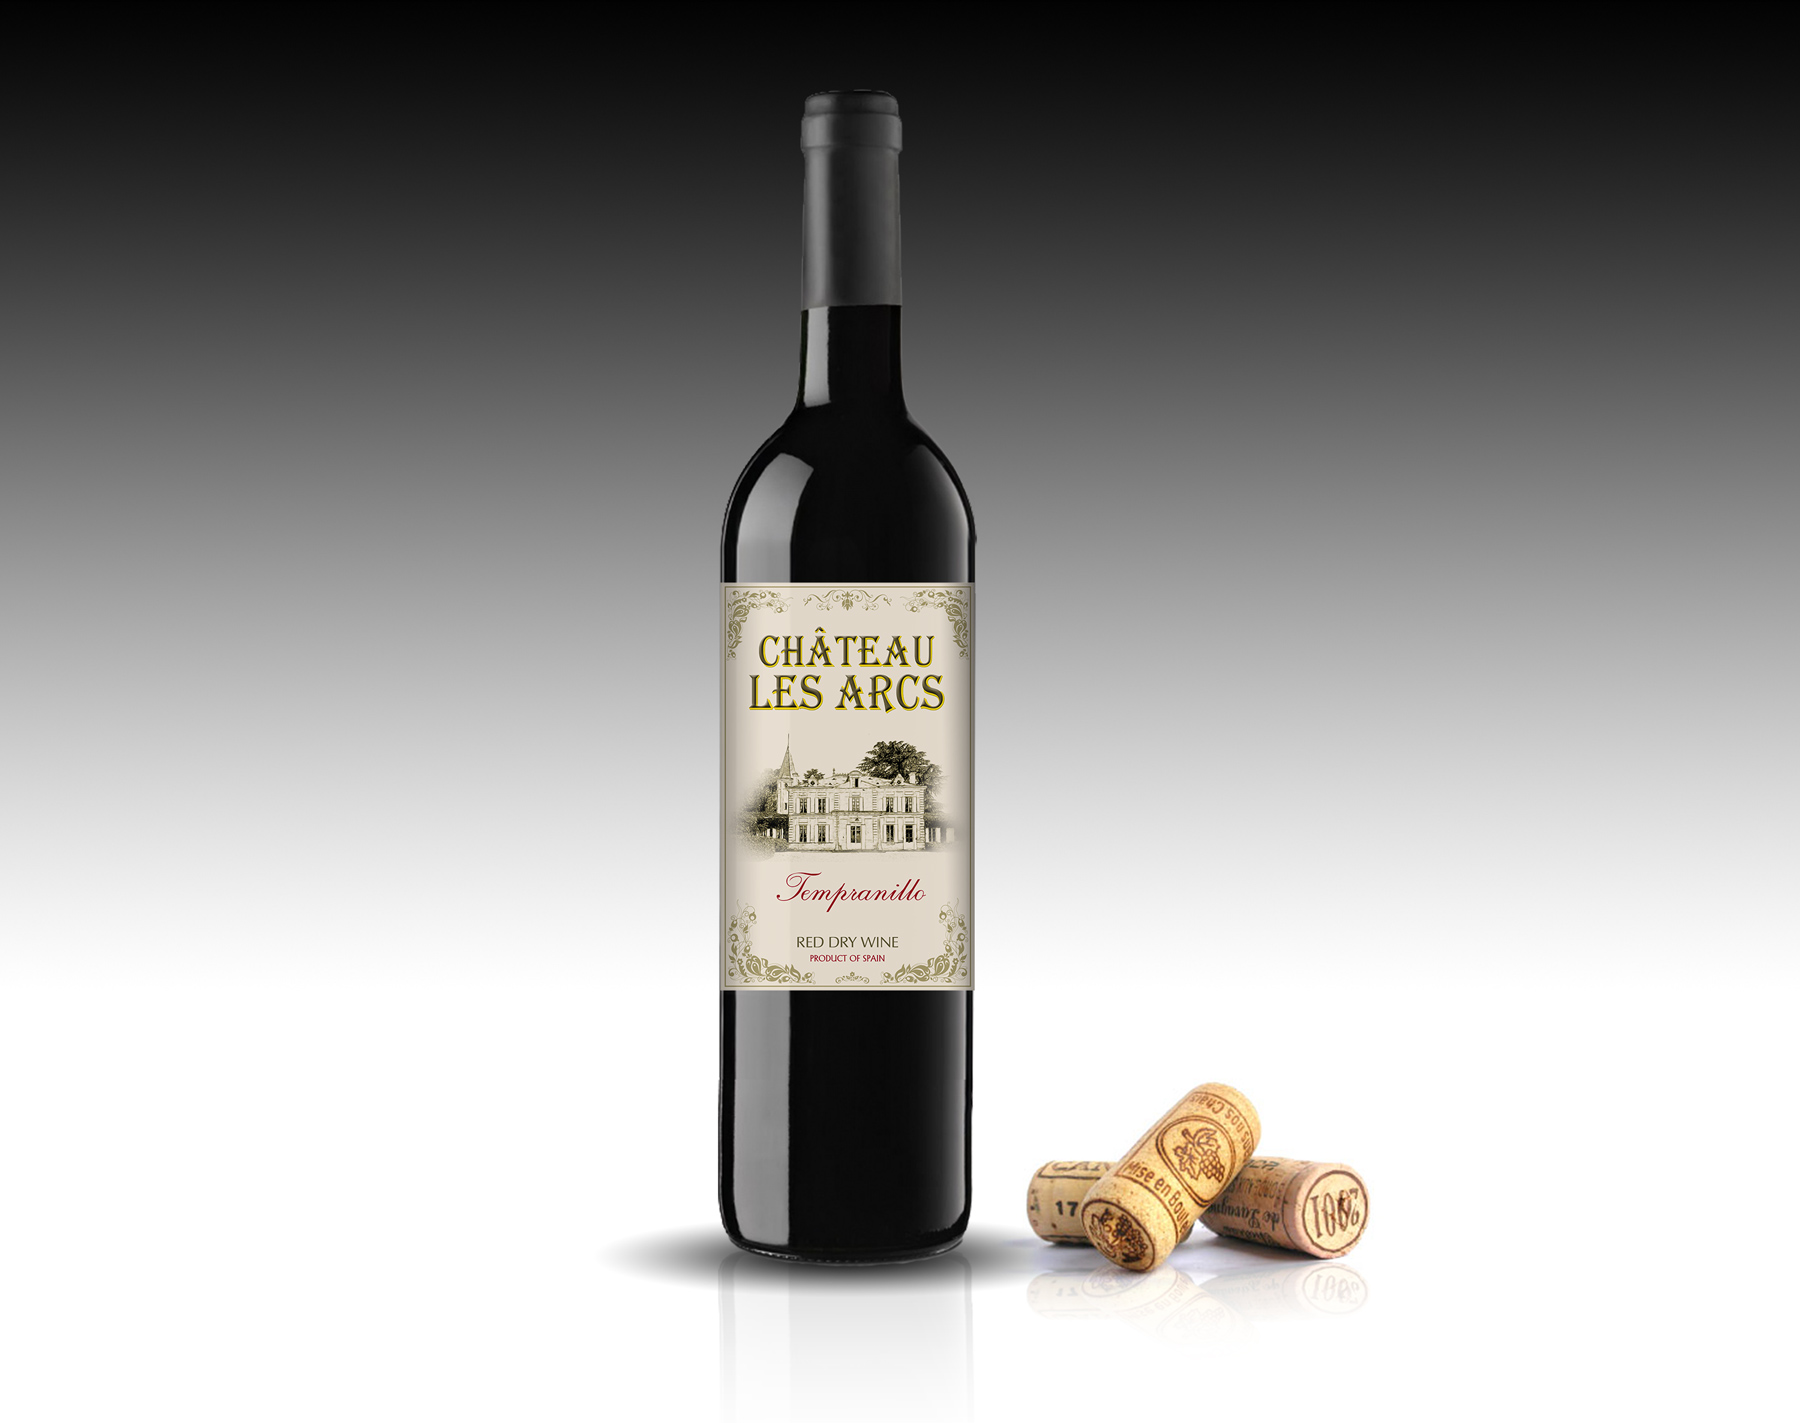 Portfolio of graphic and creative design works wine labels and packaging for wine CHATEAU LES ARCS